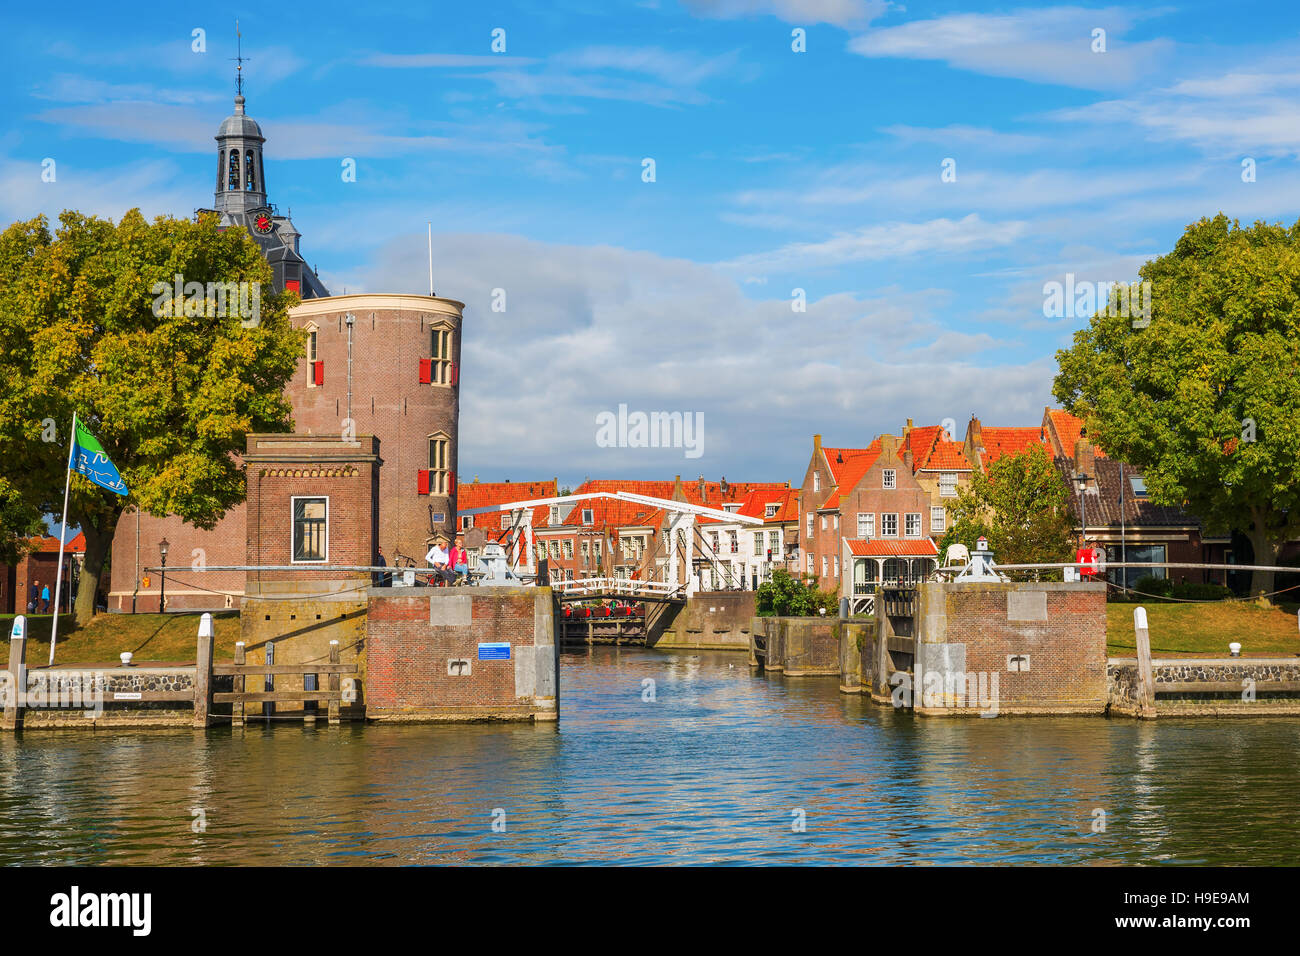 cityscape with town gate of Enkhuizen, Netherlands Stock Photo